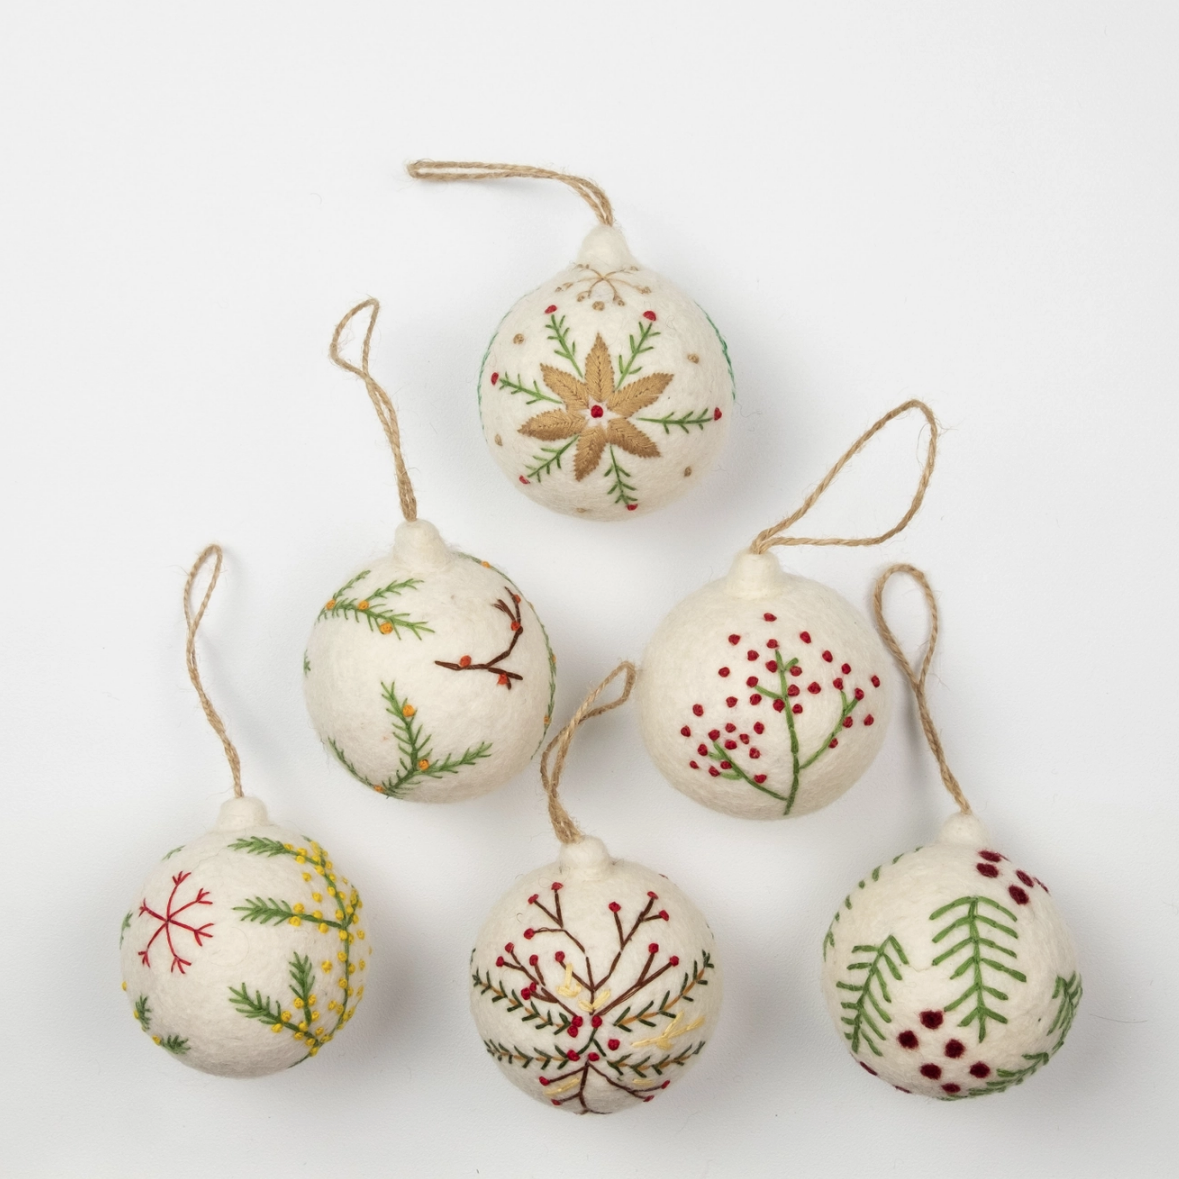 Candy Scoop Christmas Ornaments